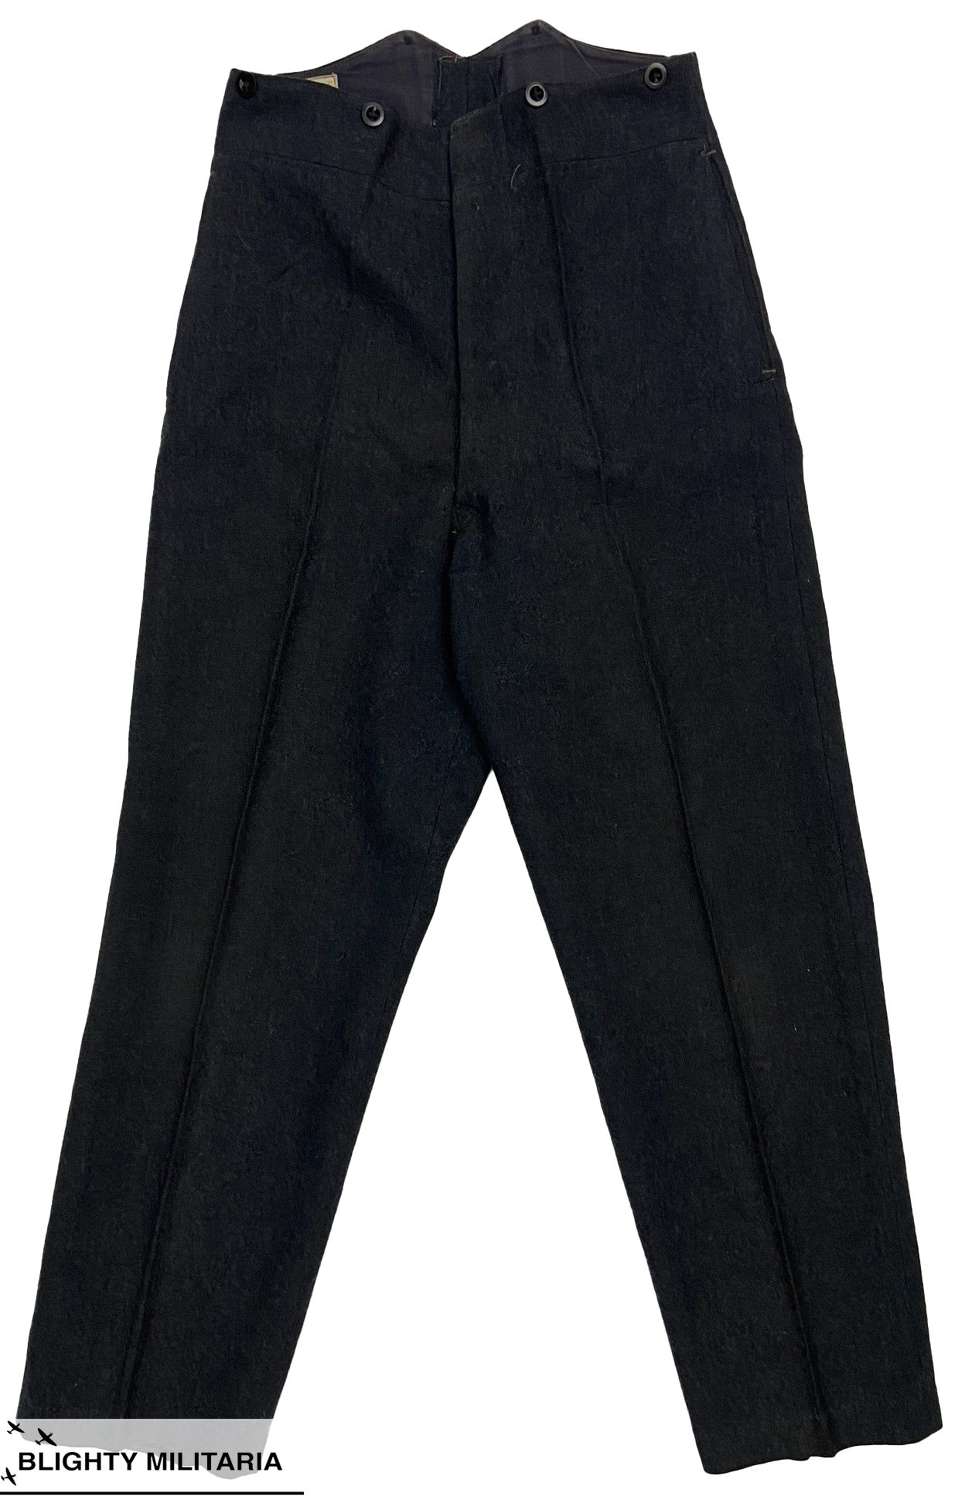 Original 1953 Dated RAF Ordinary Airman's Trousers - Size 15